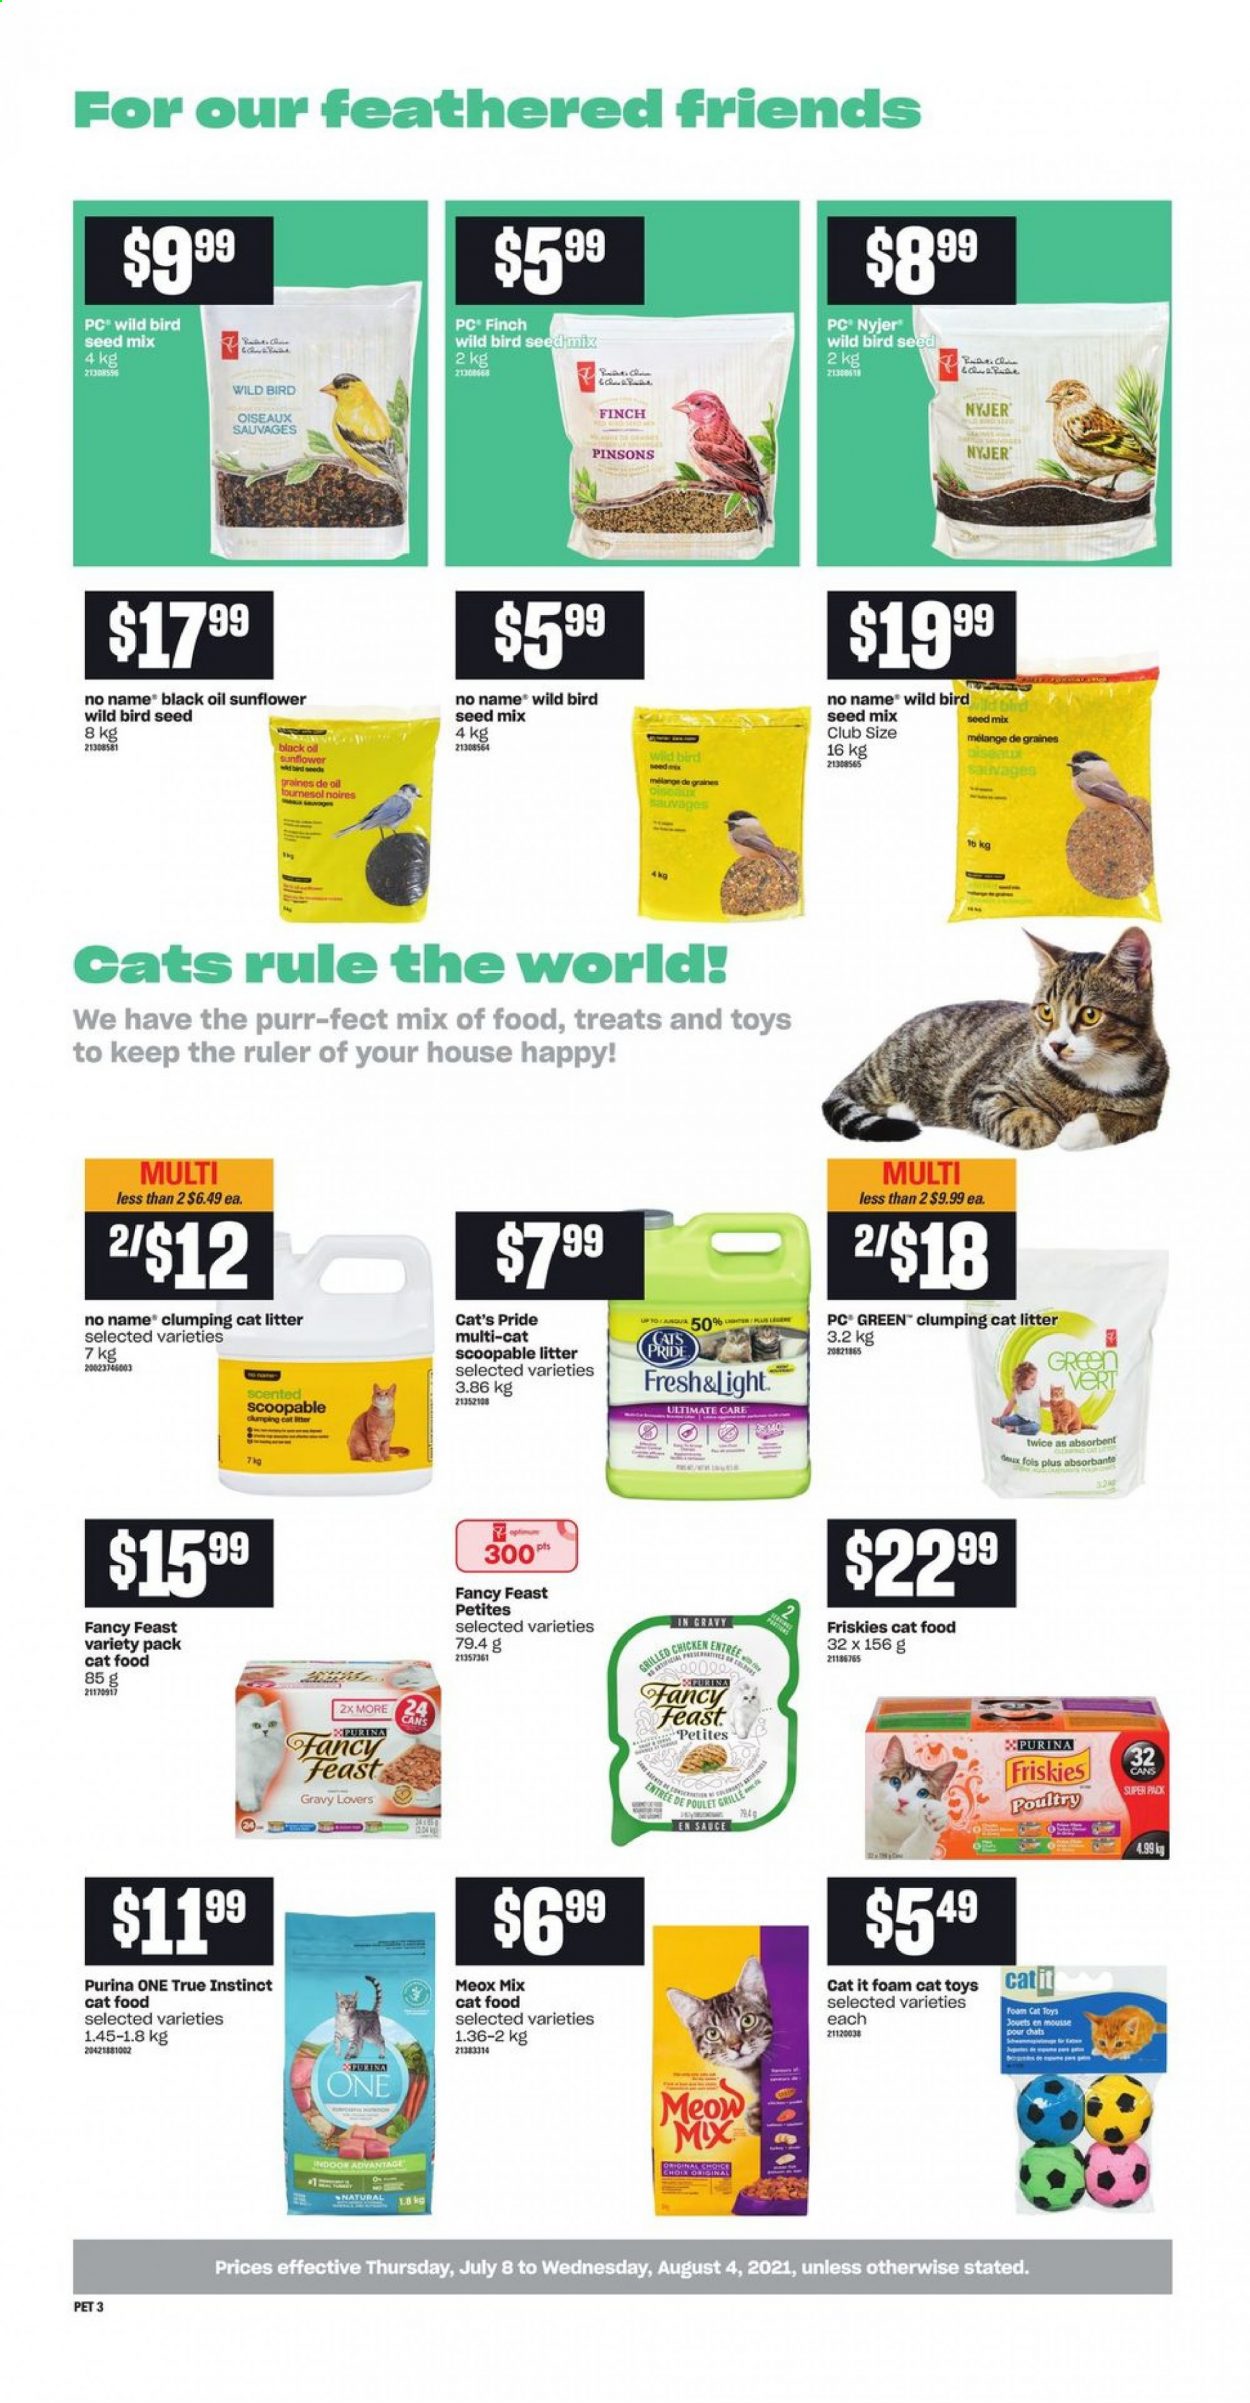 Loblaws flyer  - July 08, 2021 - August 04, 2021.